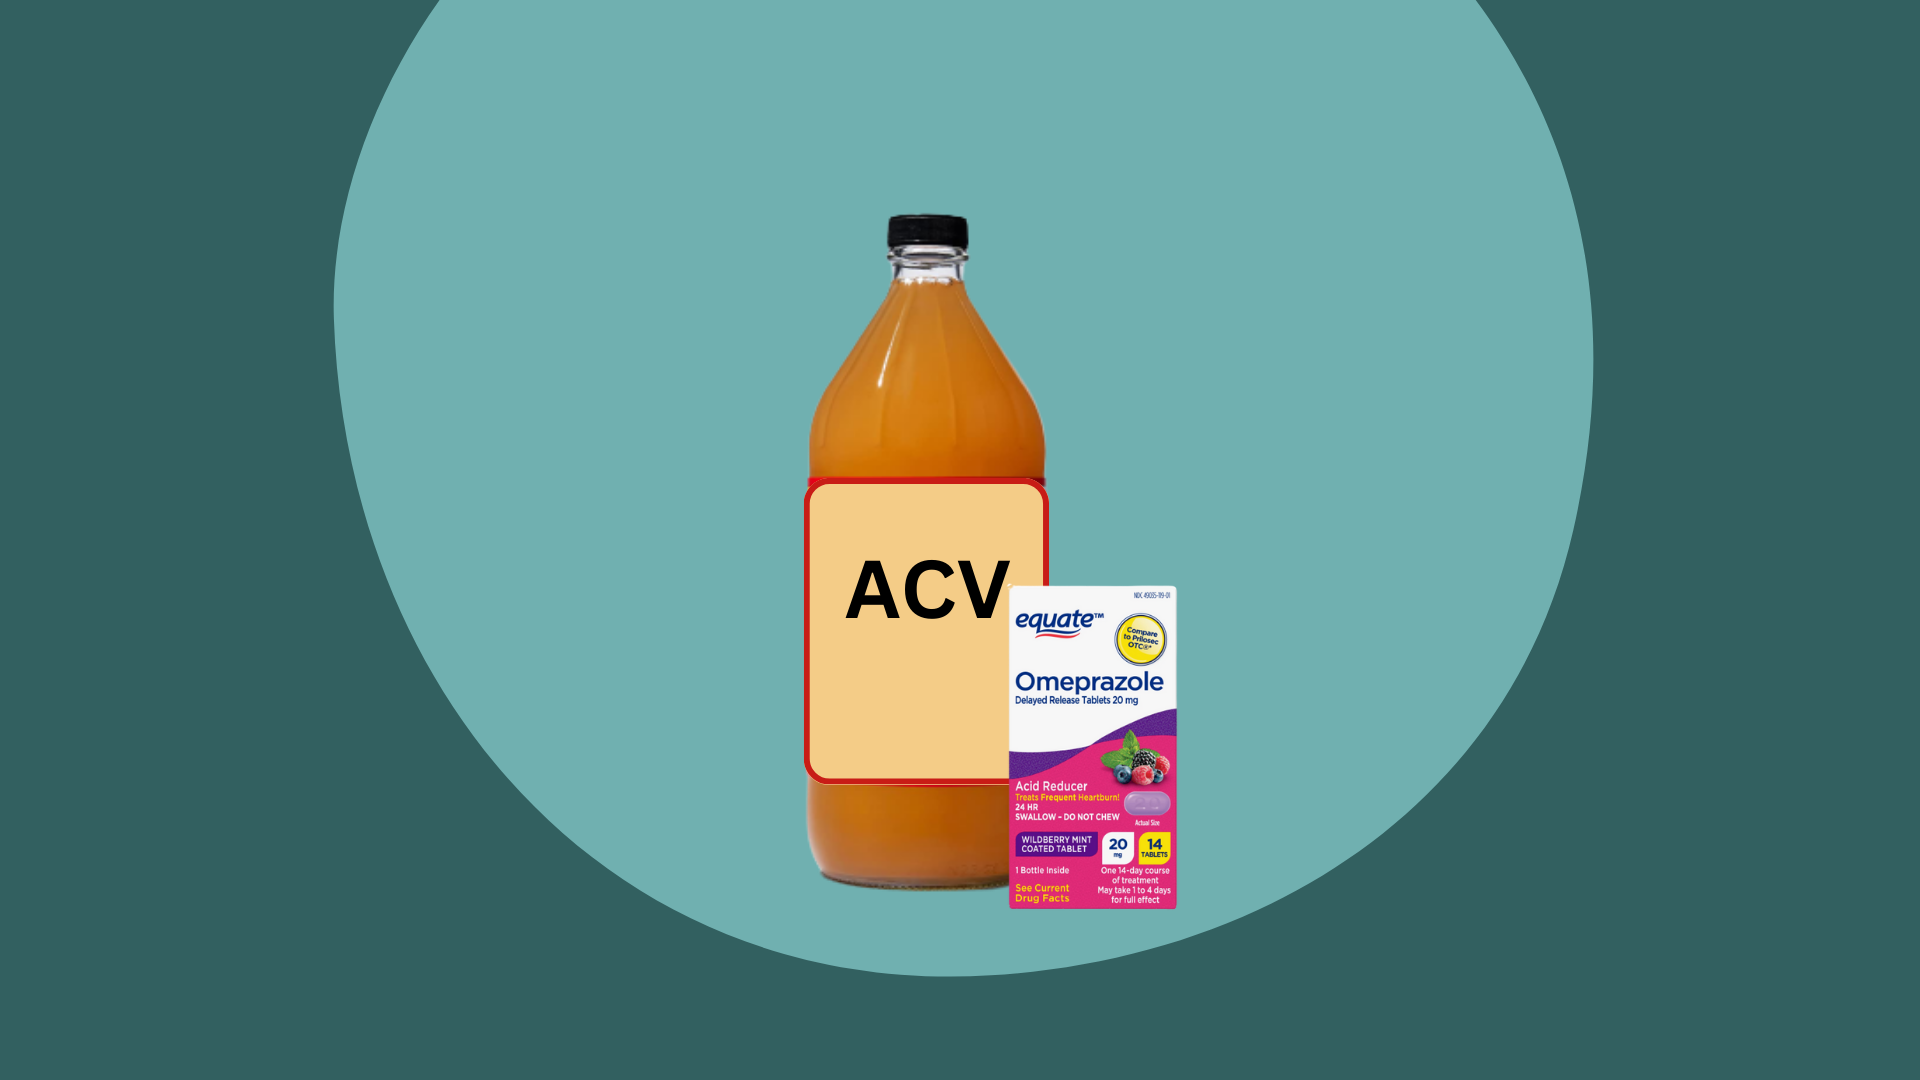 ACV bottle and Omeprazole are together in a light green circle with a dark green background colour